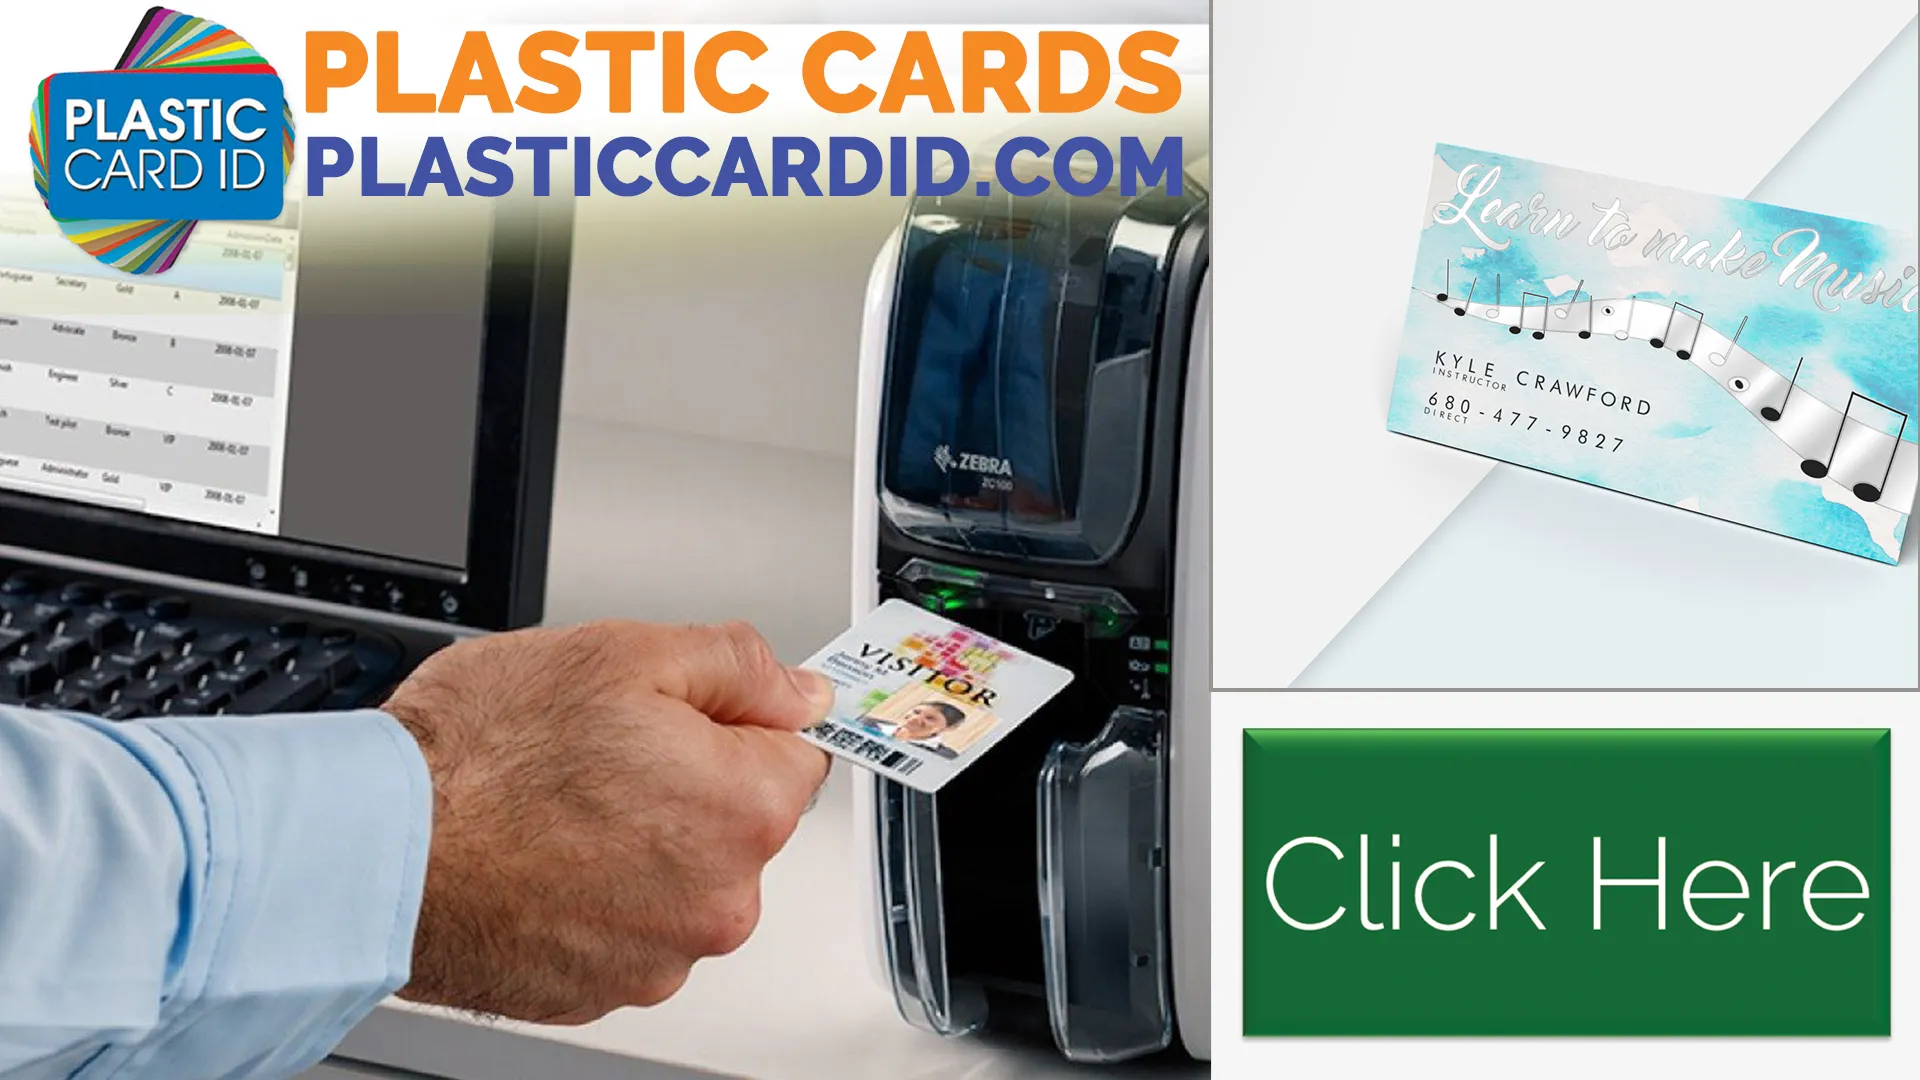 Welcome to Plastic Card ID




, Your Premier Destination for Tailored Design and Precision Litho Printing